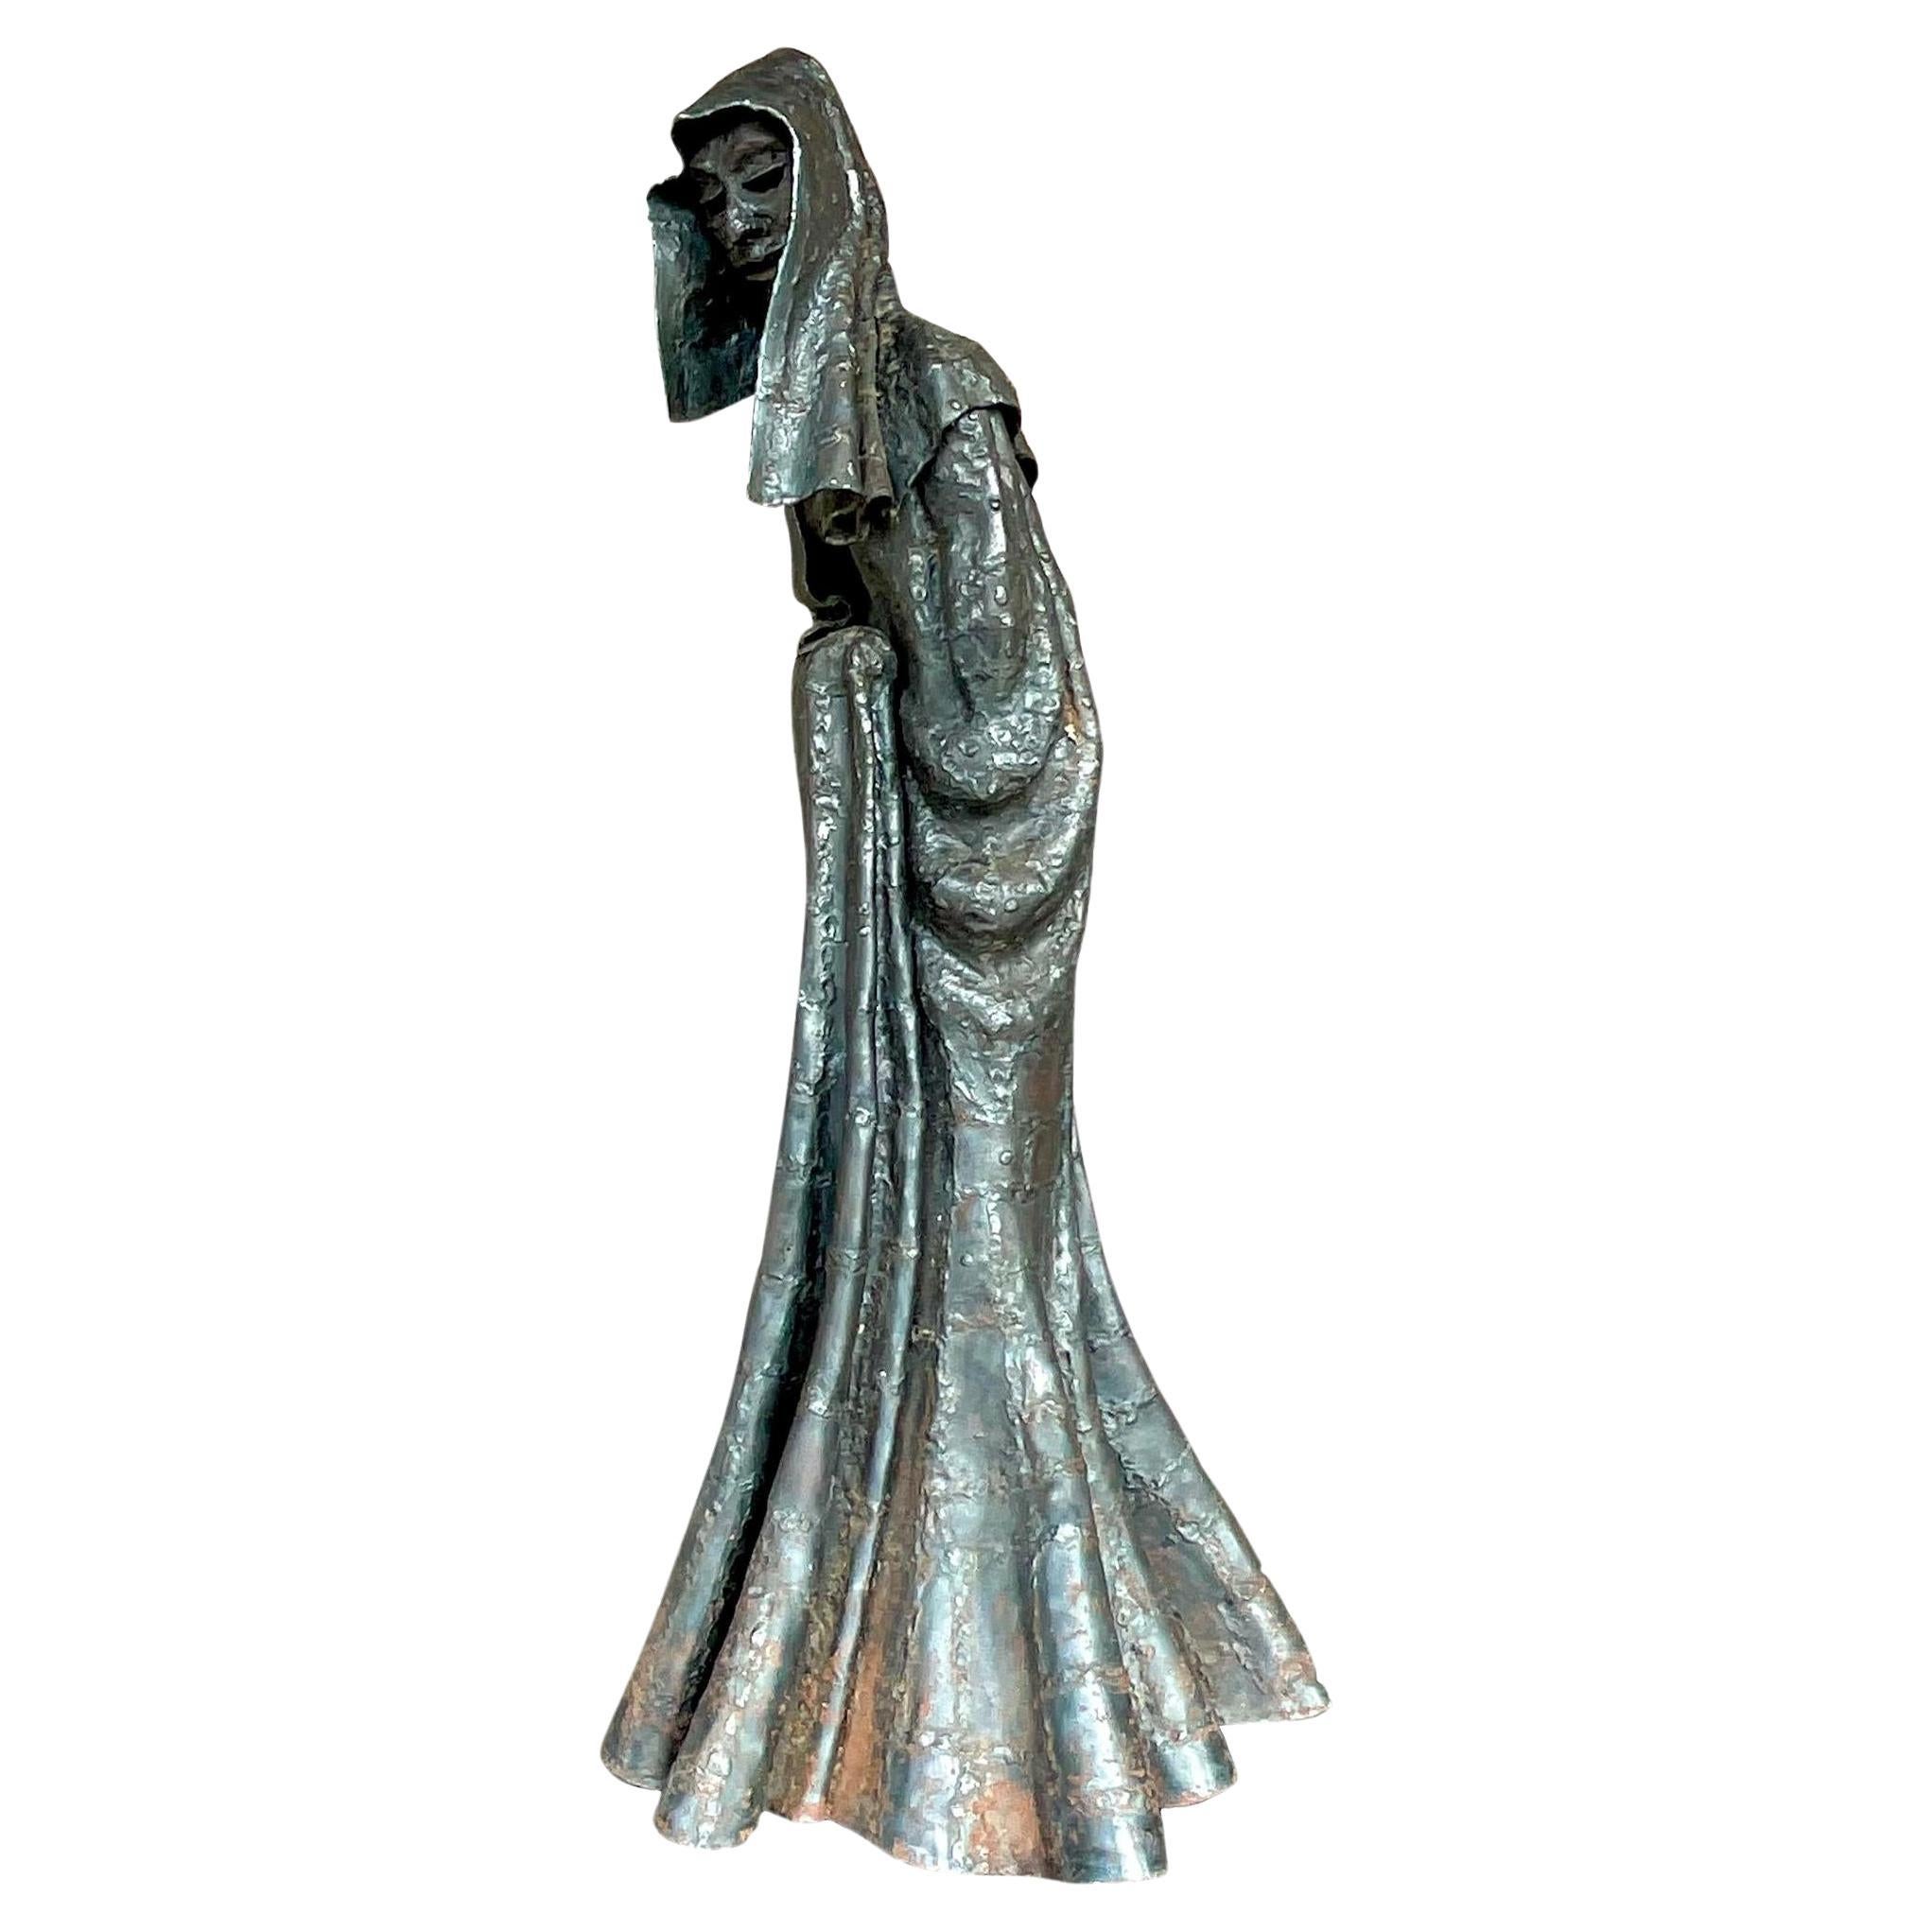 Vintage Boho Patinated Steel Sculpture of Cloaked Woman